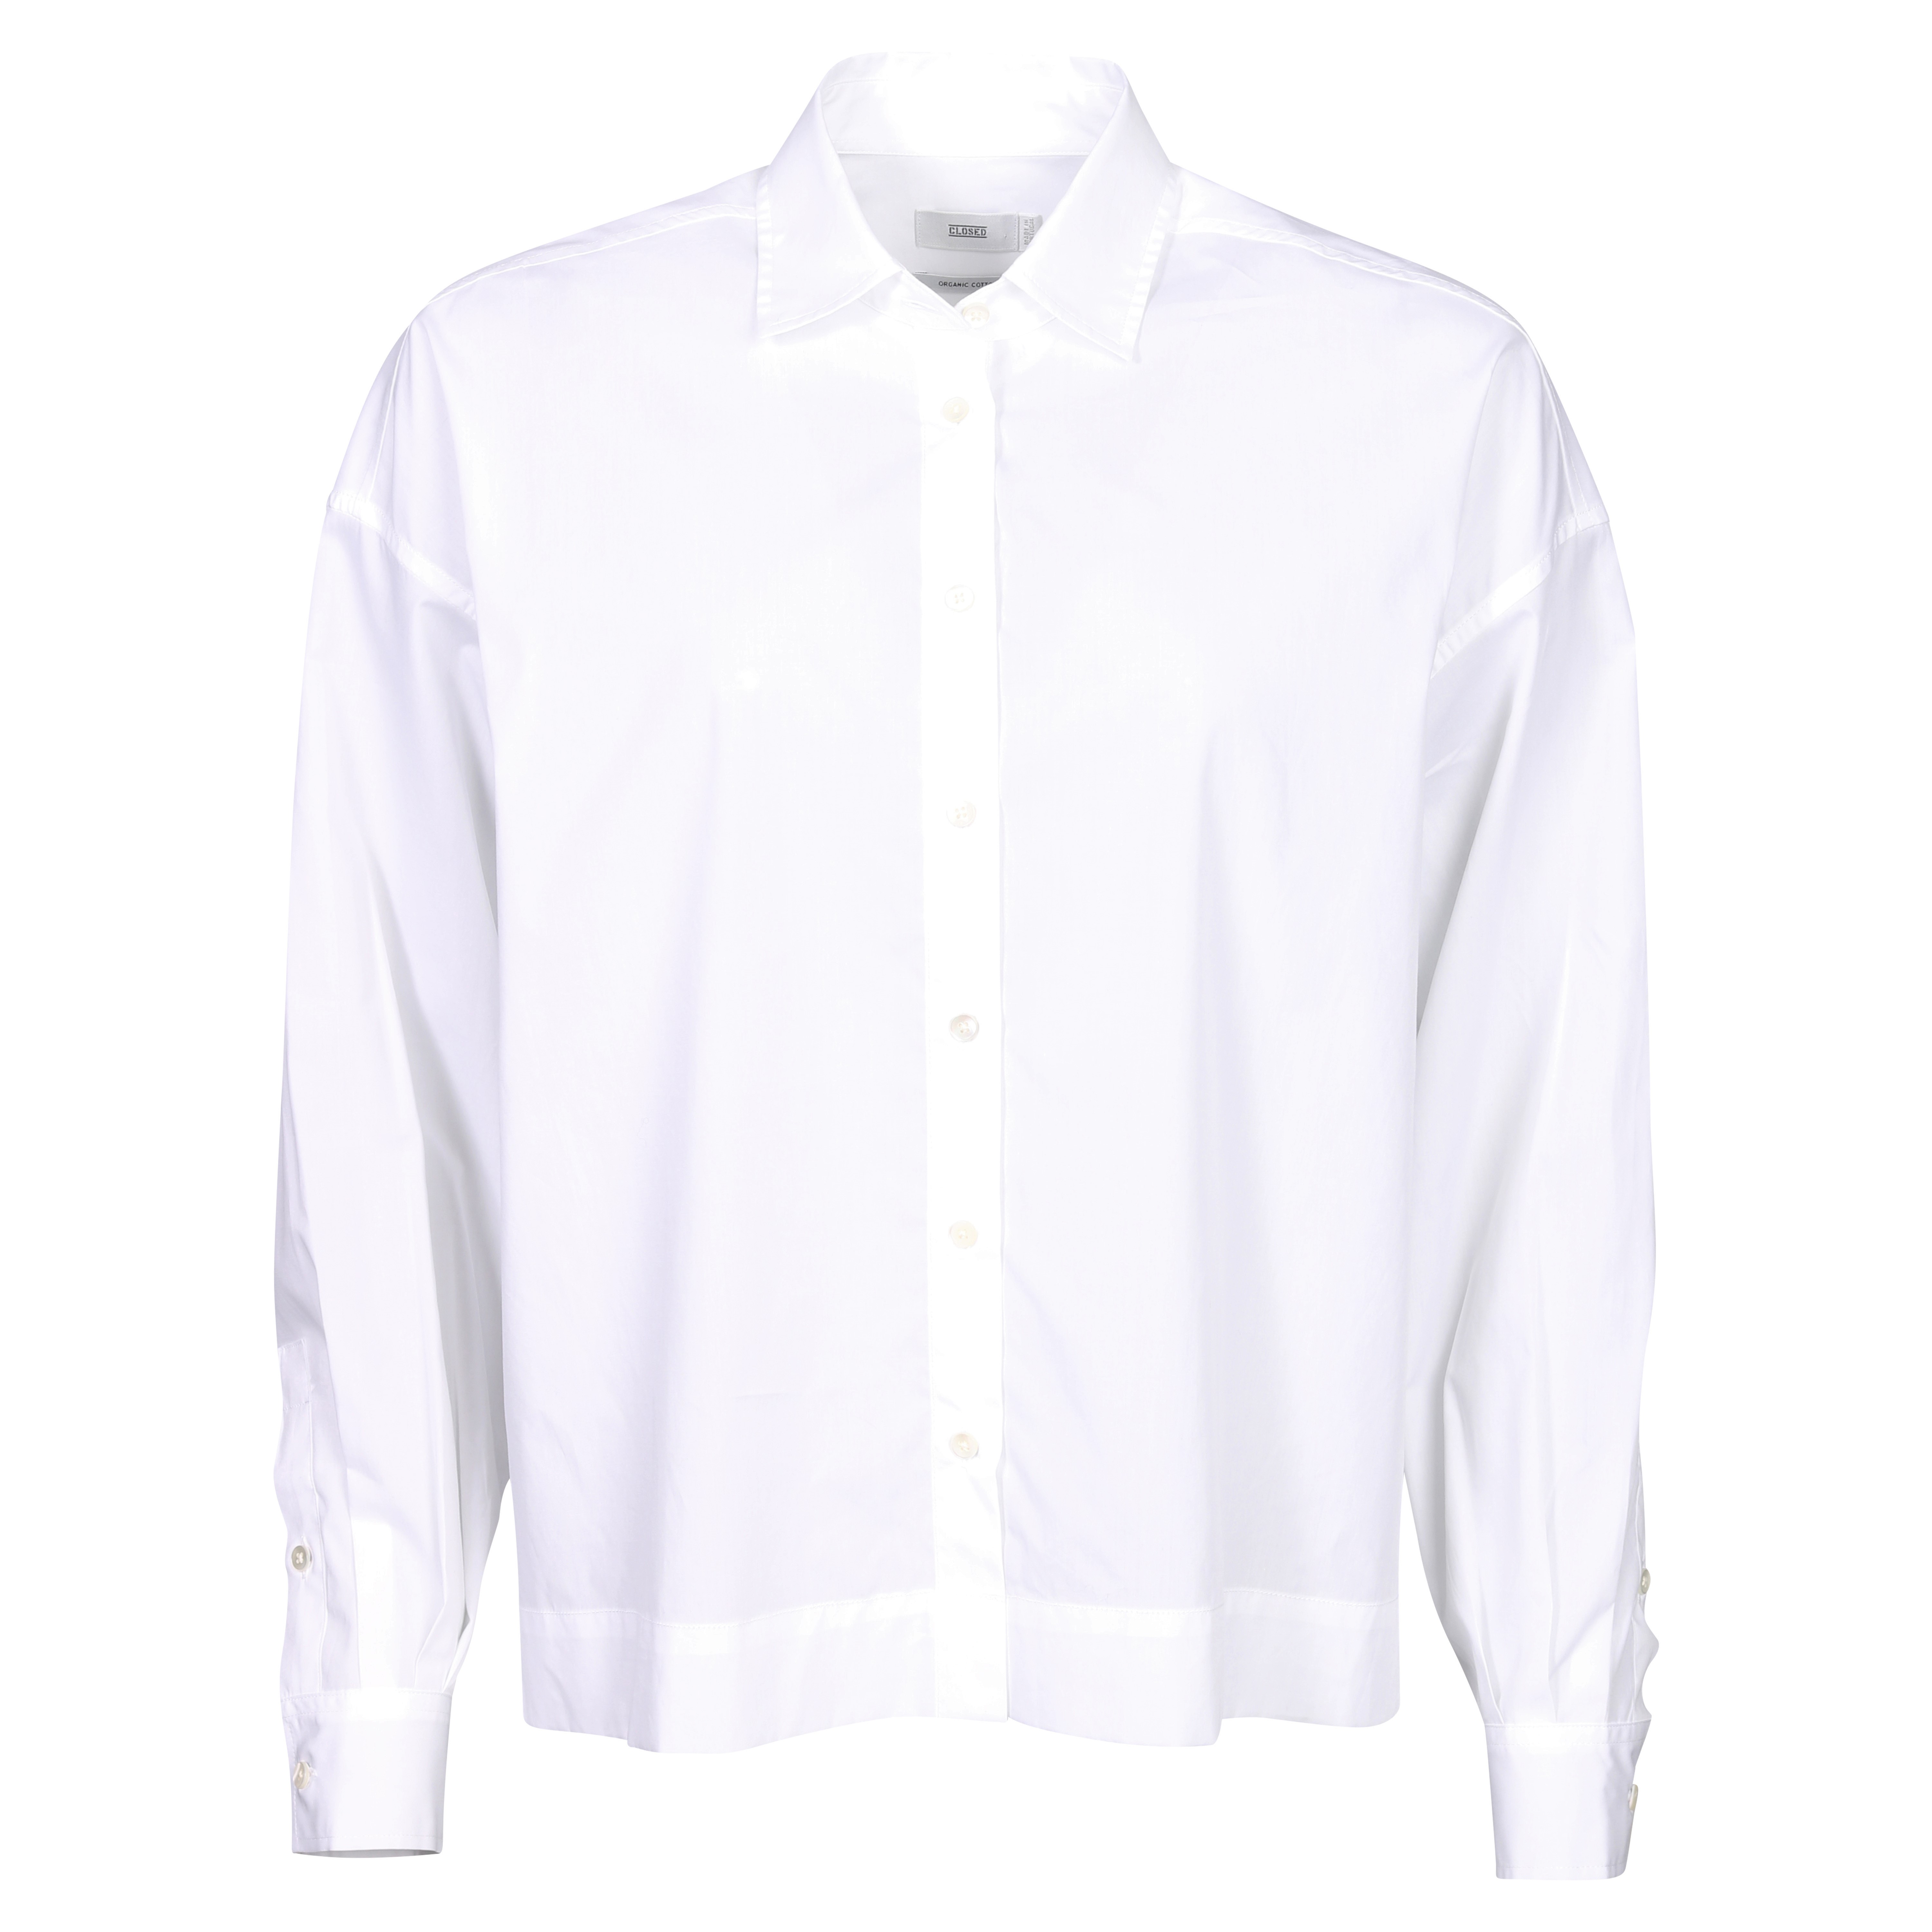 Closed Gathered Shirt in White S